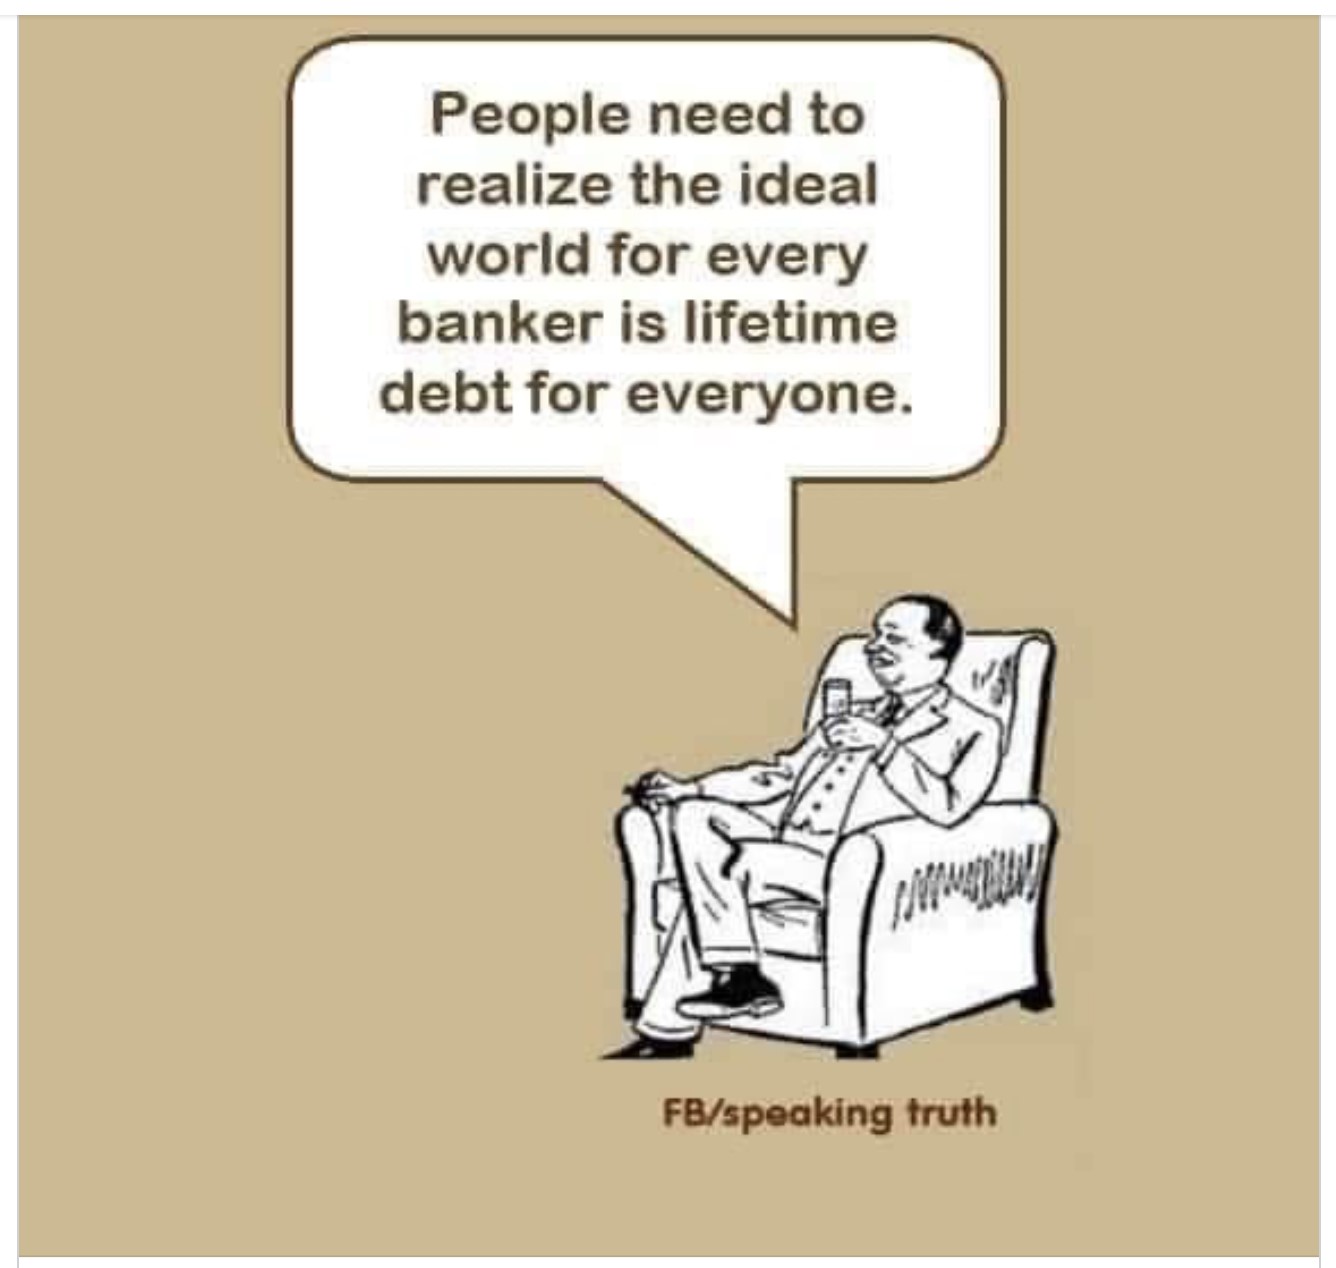 People need to realize the ideal world for every banker is lifetime debt for everyone.